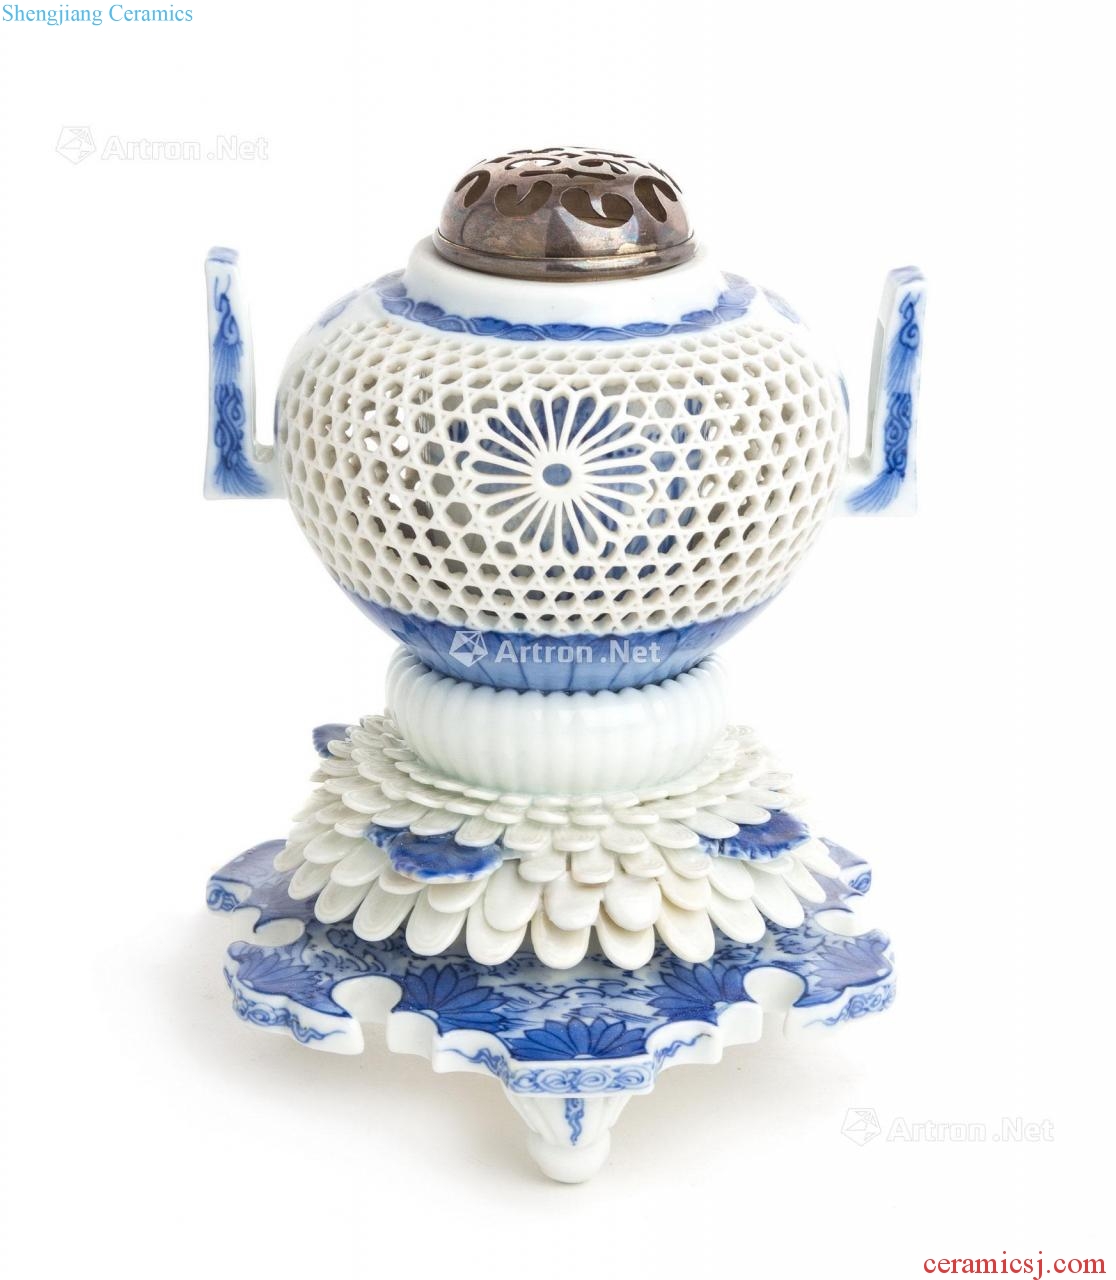 In the 19th century Blue and white engraved look chrysanthemum form censer